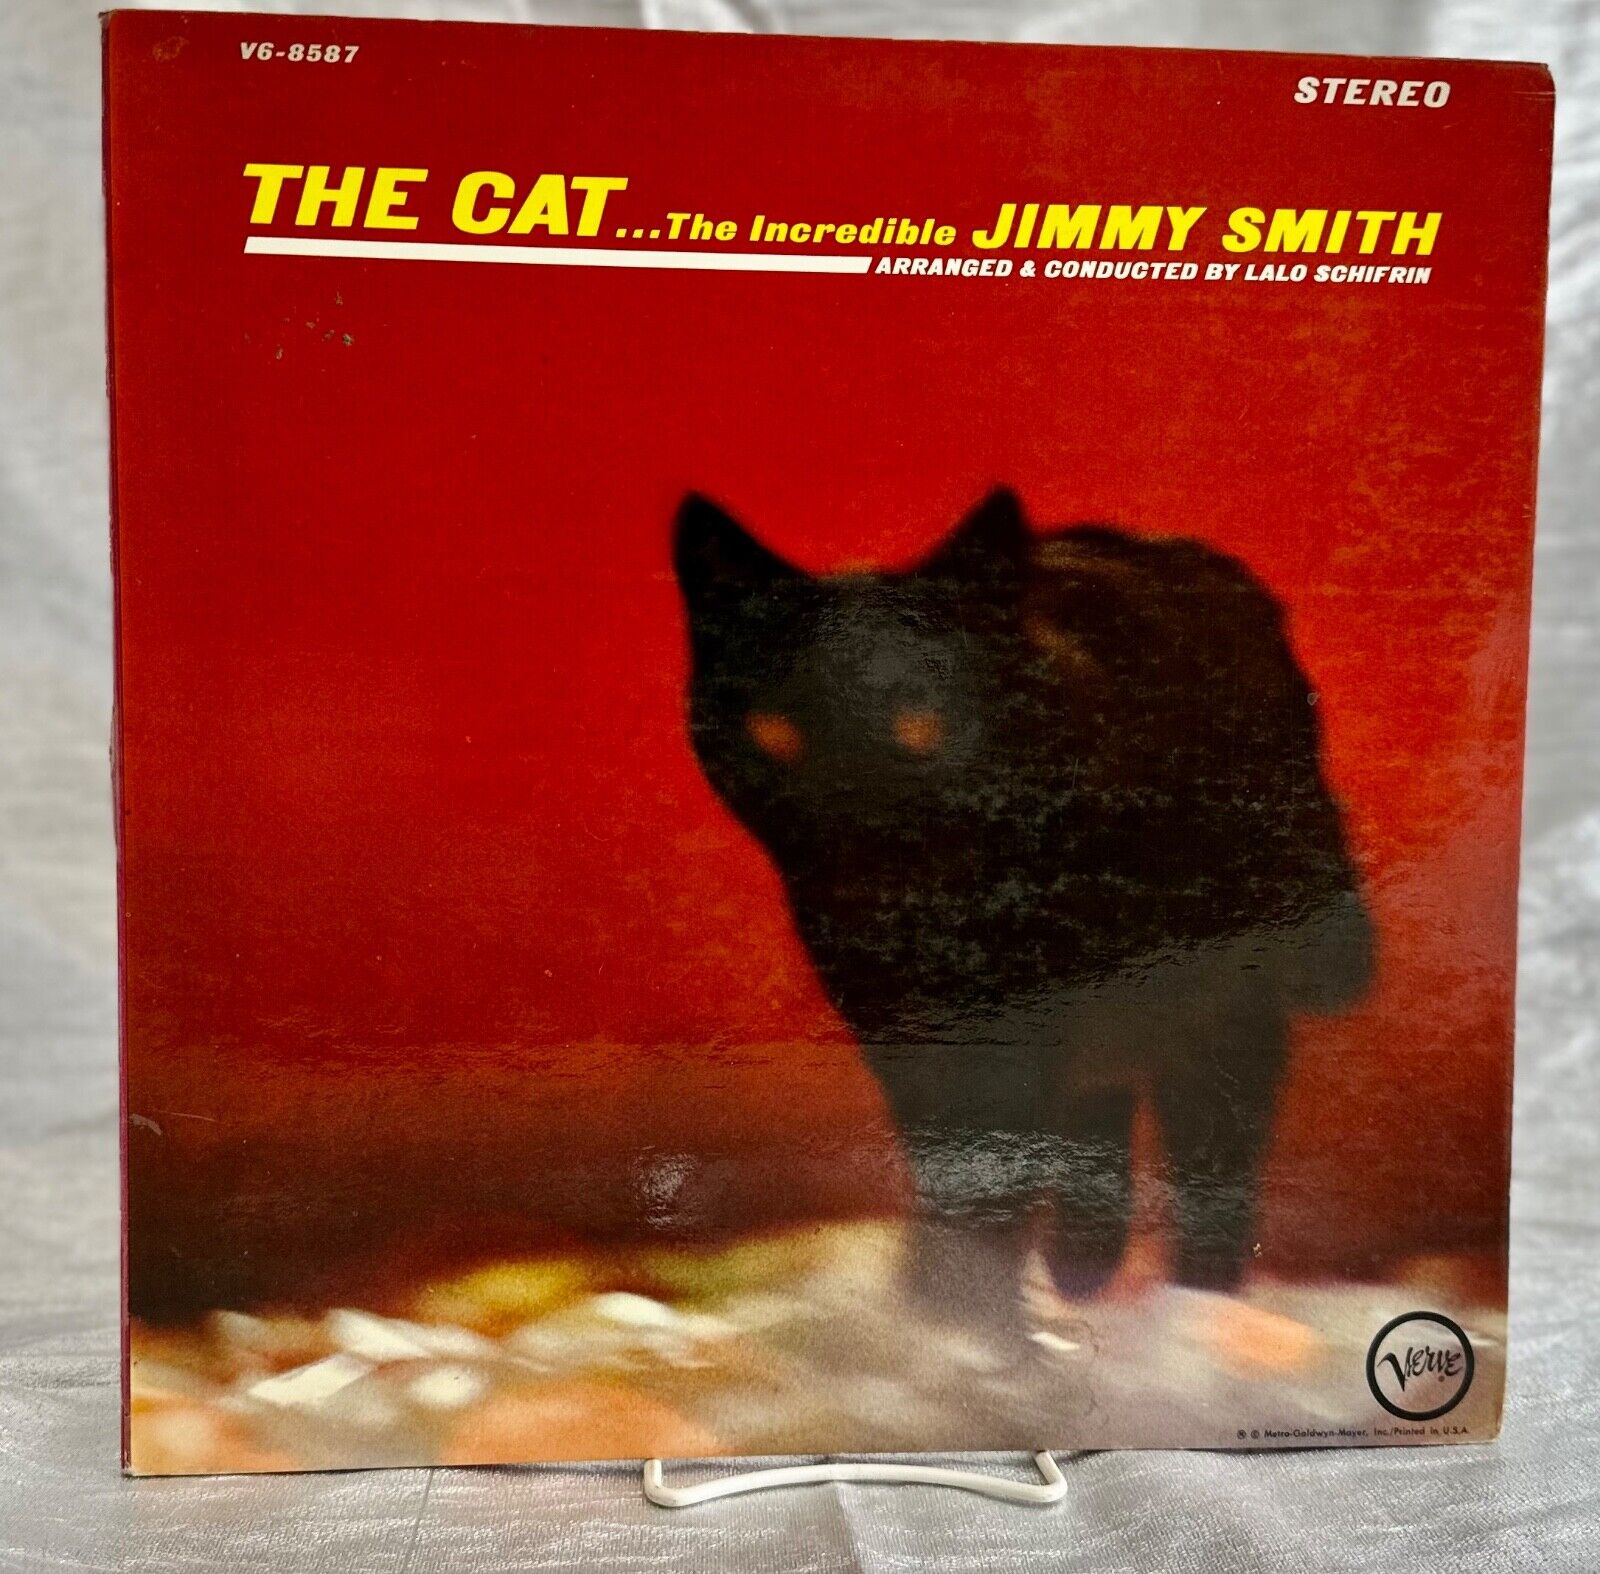 LP: The Incredible Jimmy Smith, The Cat, Verve, Stereo, 1964, Jazz, Blues, Stage